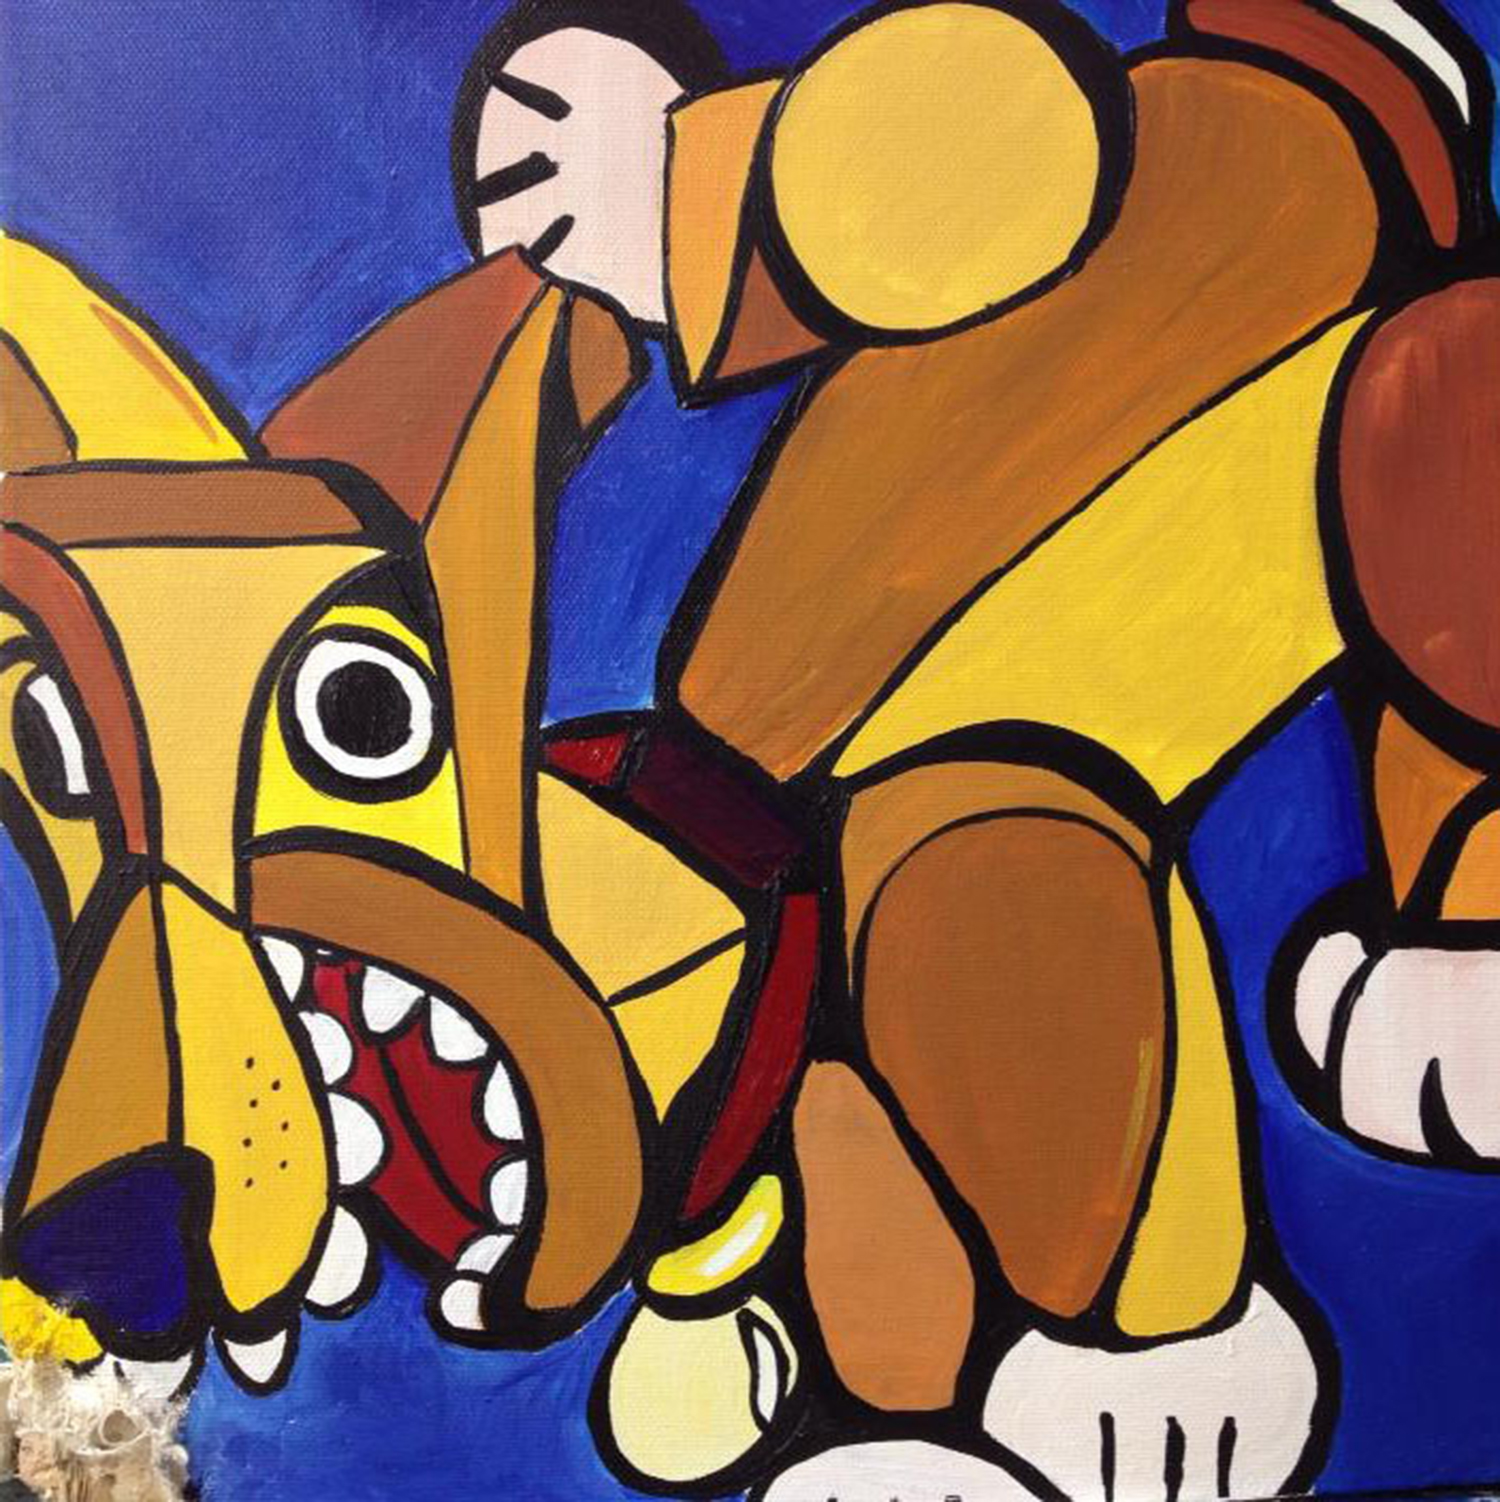 pop art-inspired painting with heavy lines and bright colors of a dog tearing at the corner of a canvas. Image by Courtney Huston